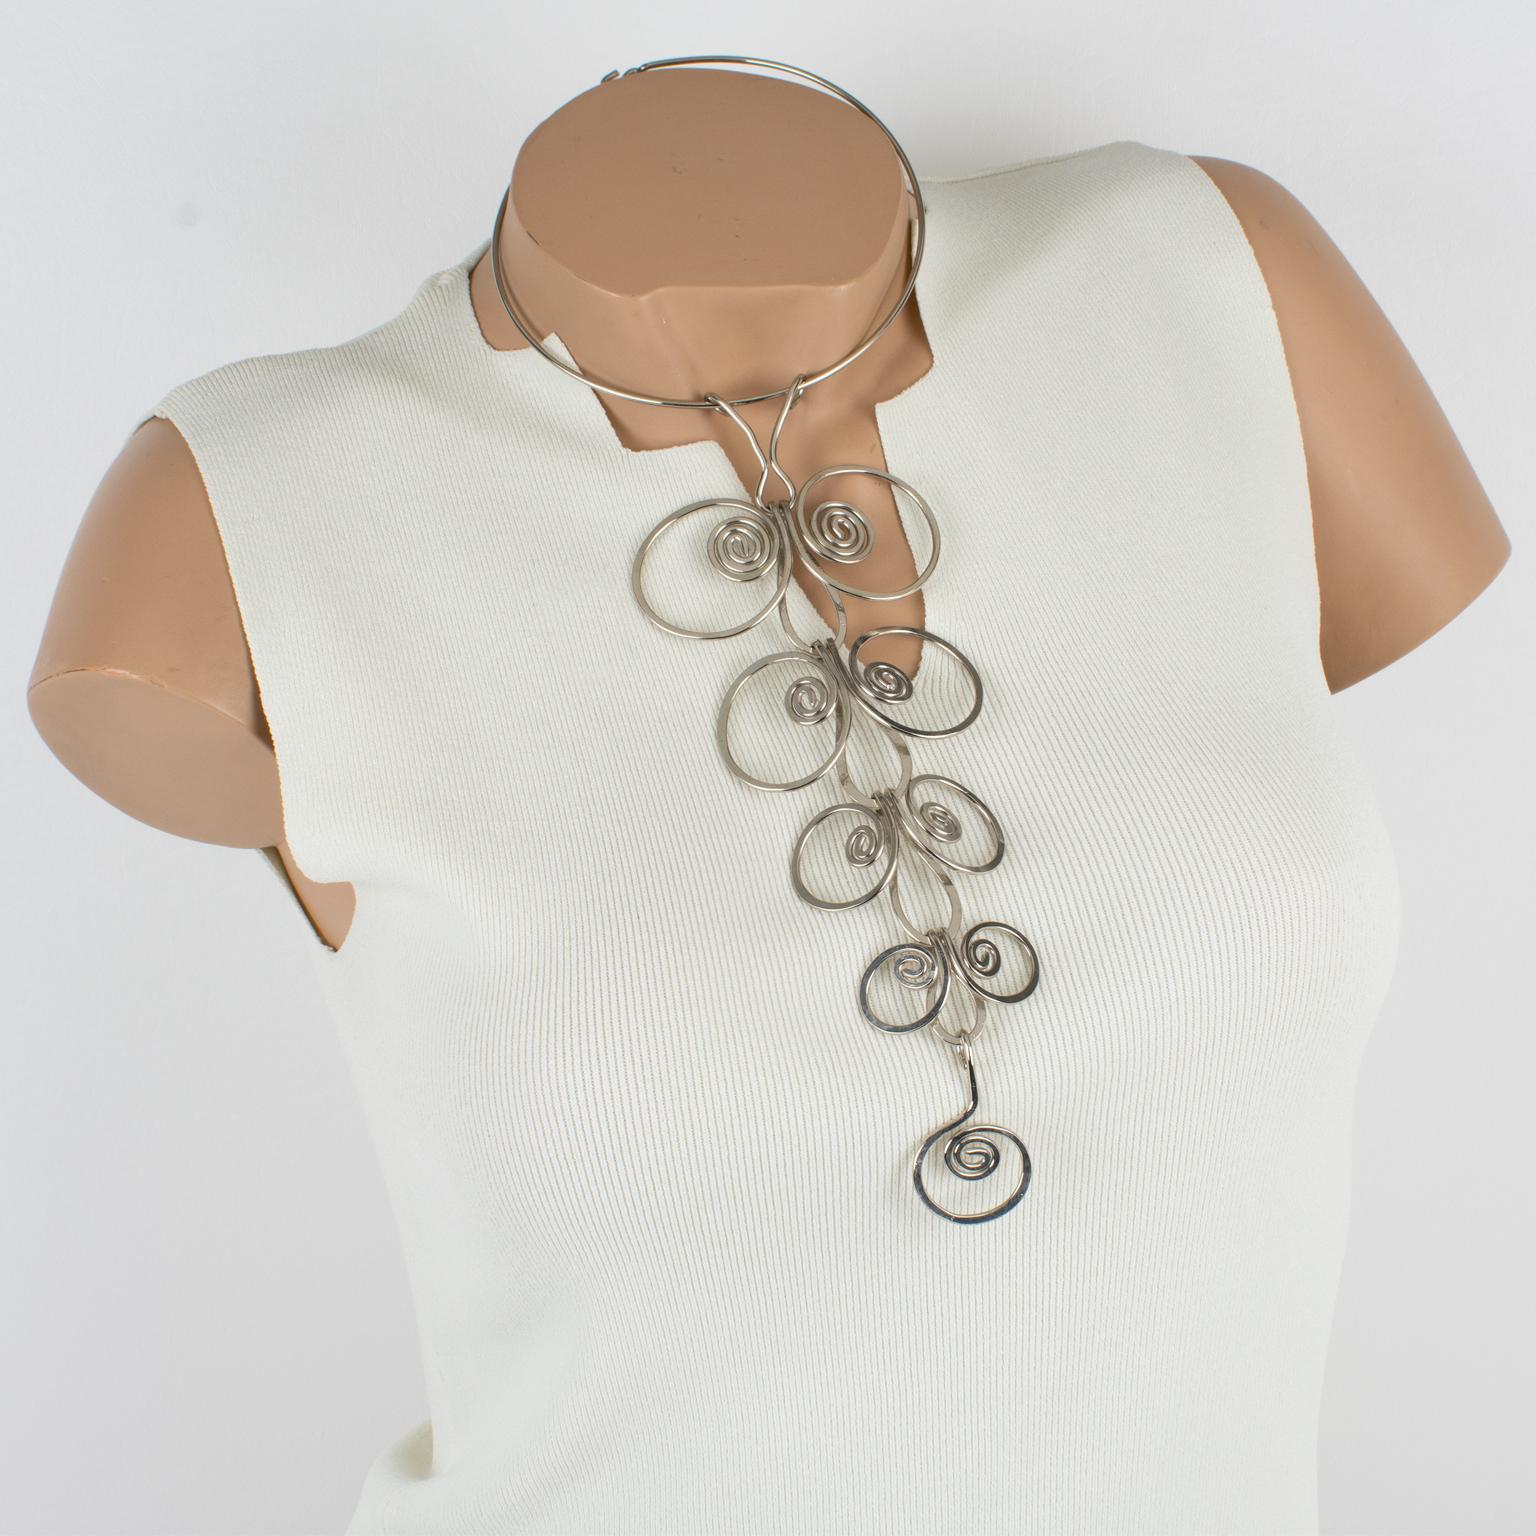 A stunning modernist Space Age long metal necklace with a geometric pendant from the 1970s, reminiscent of Paco Rabanne's work. The piece features a chromed metal rigid around-the-neck band, ornate with an impressive geometric dangling pendant. The